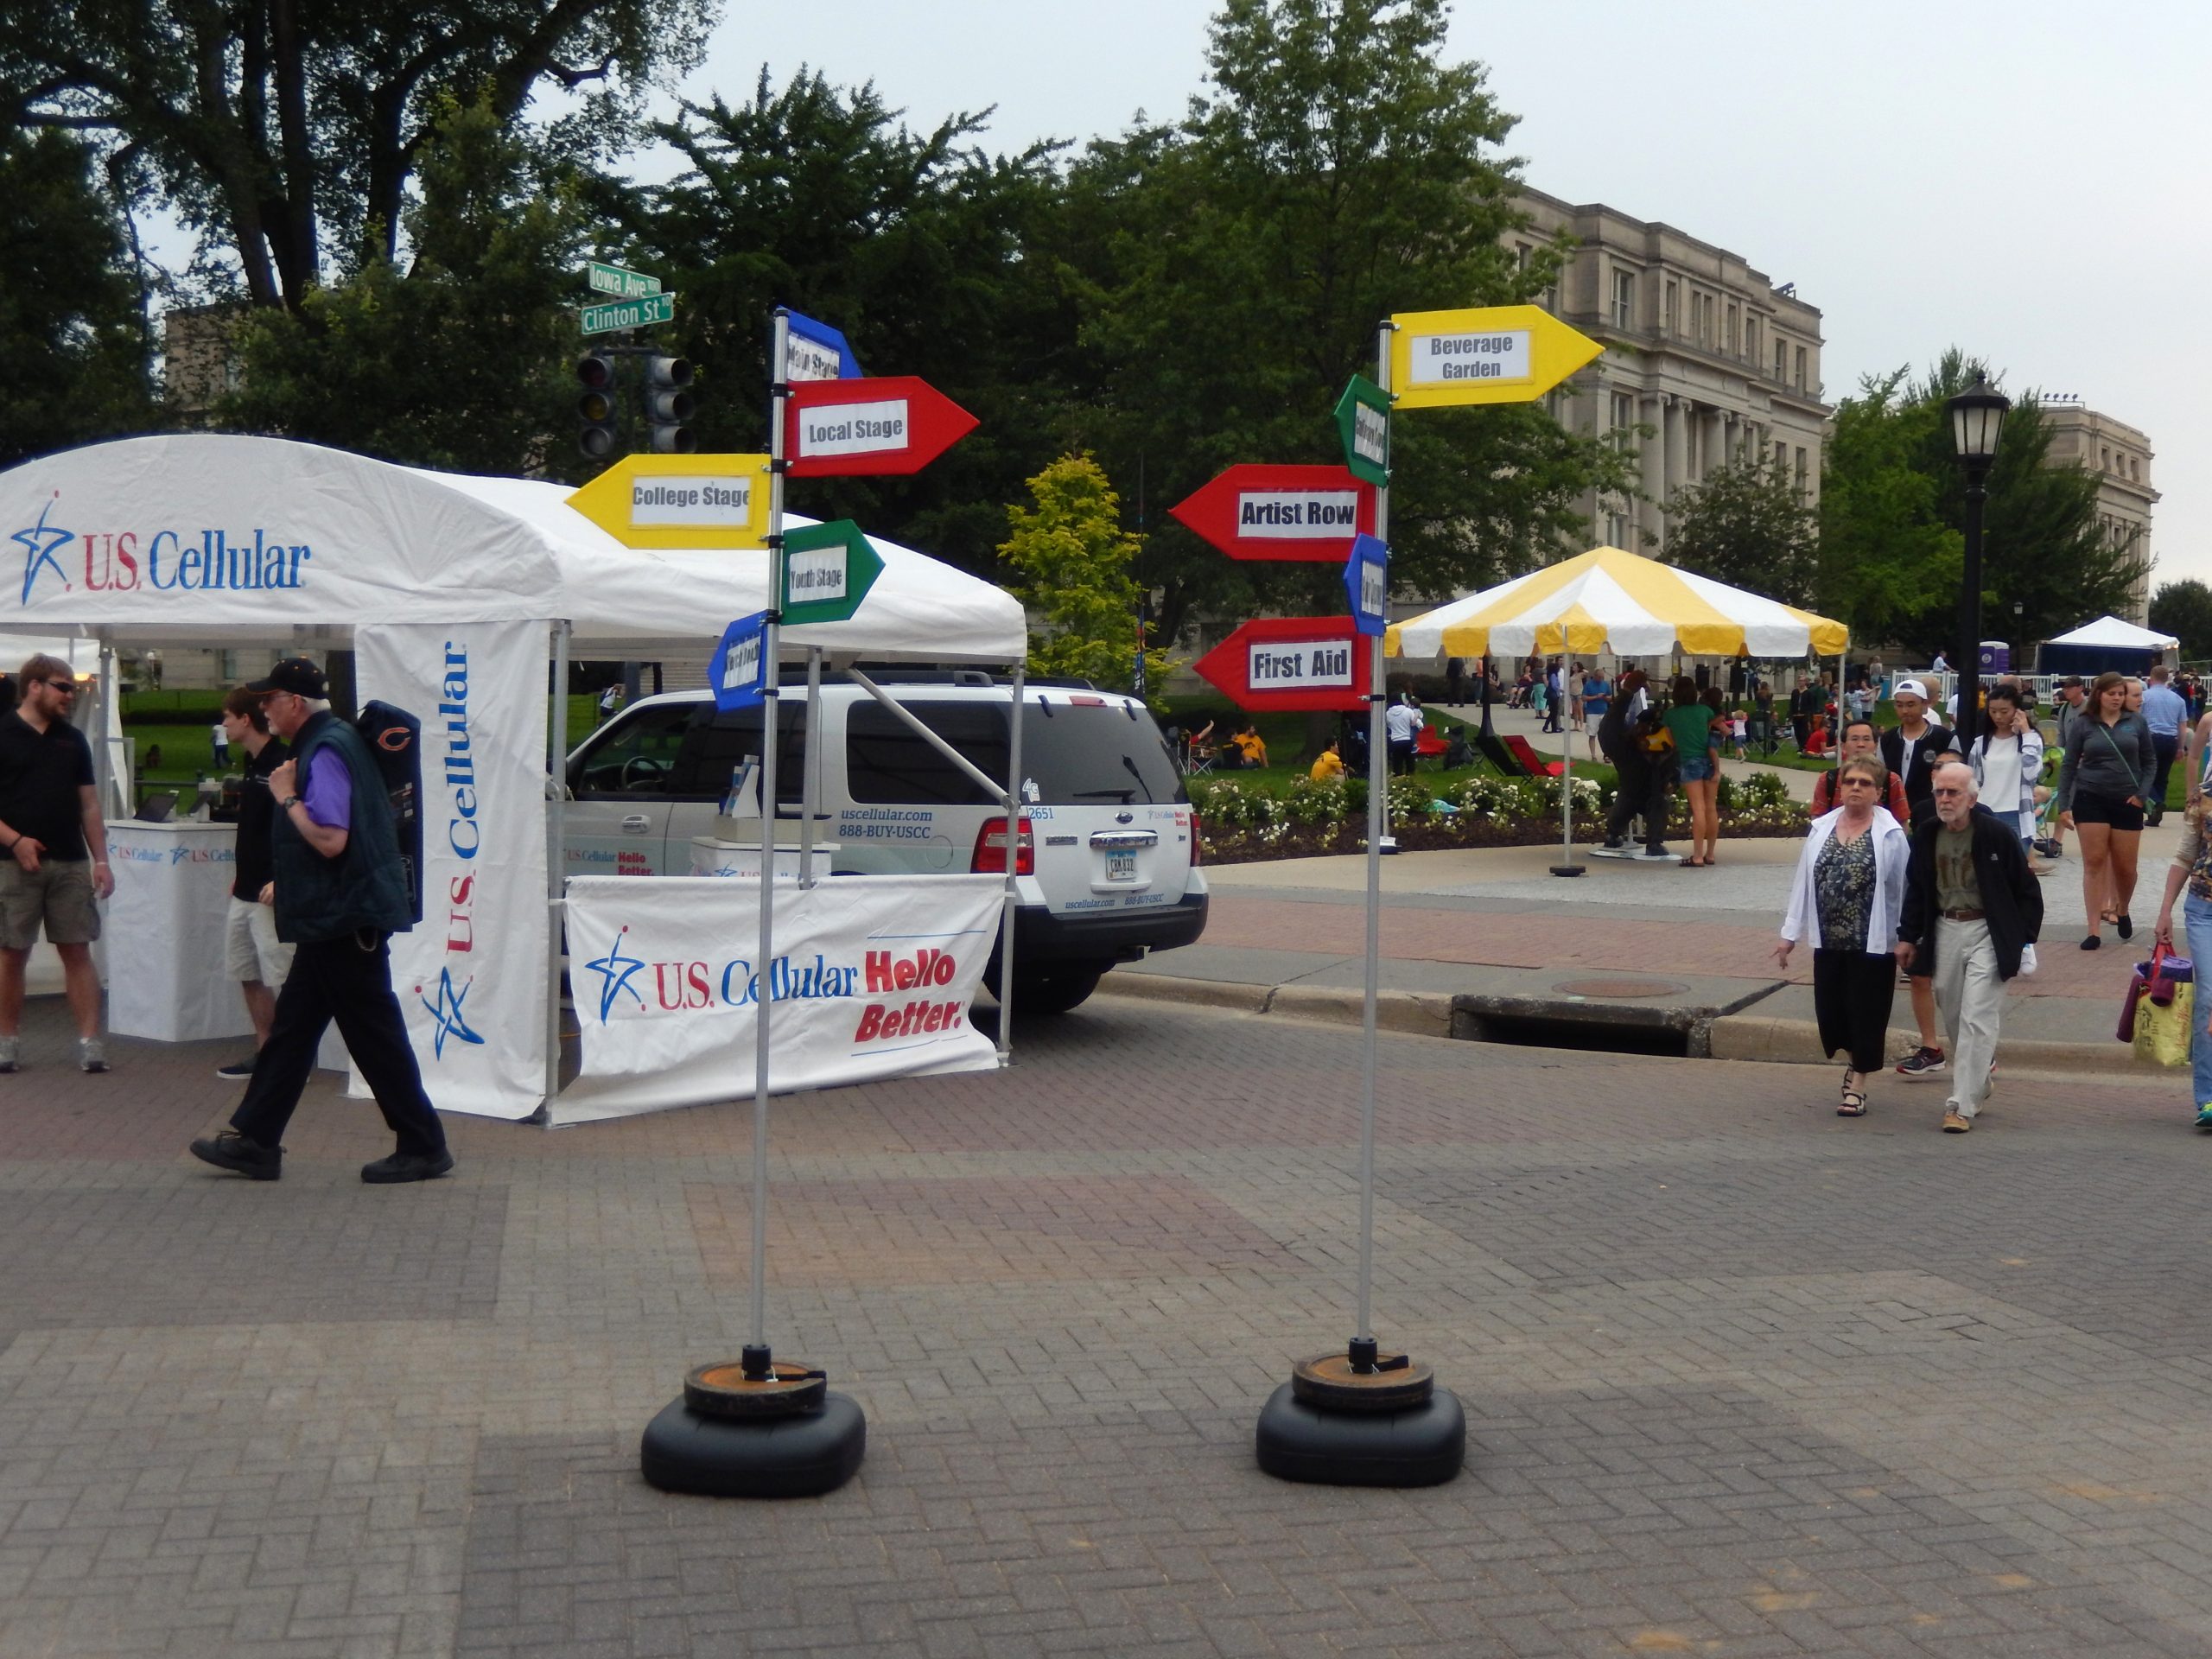 Direction signs at Iowa City Jazz Fest 2015